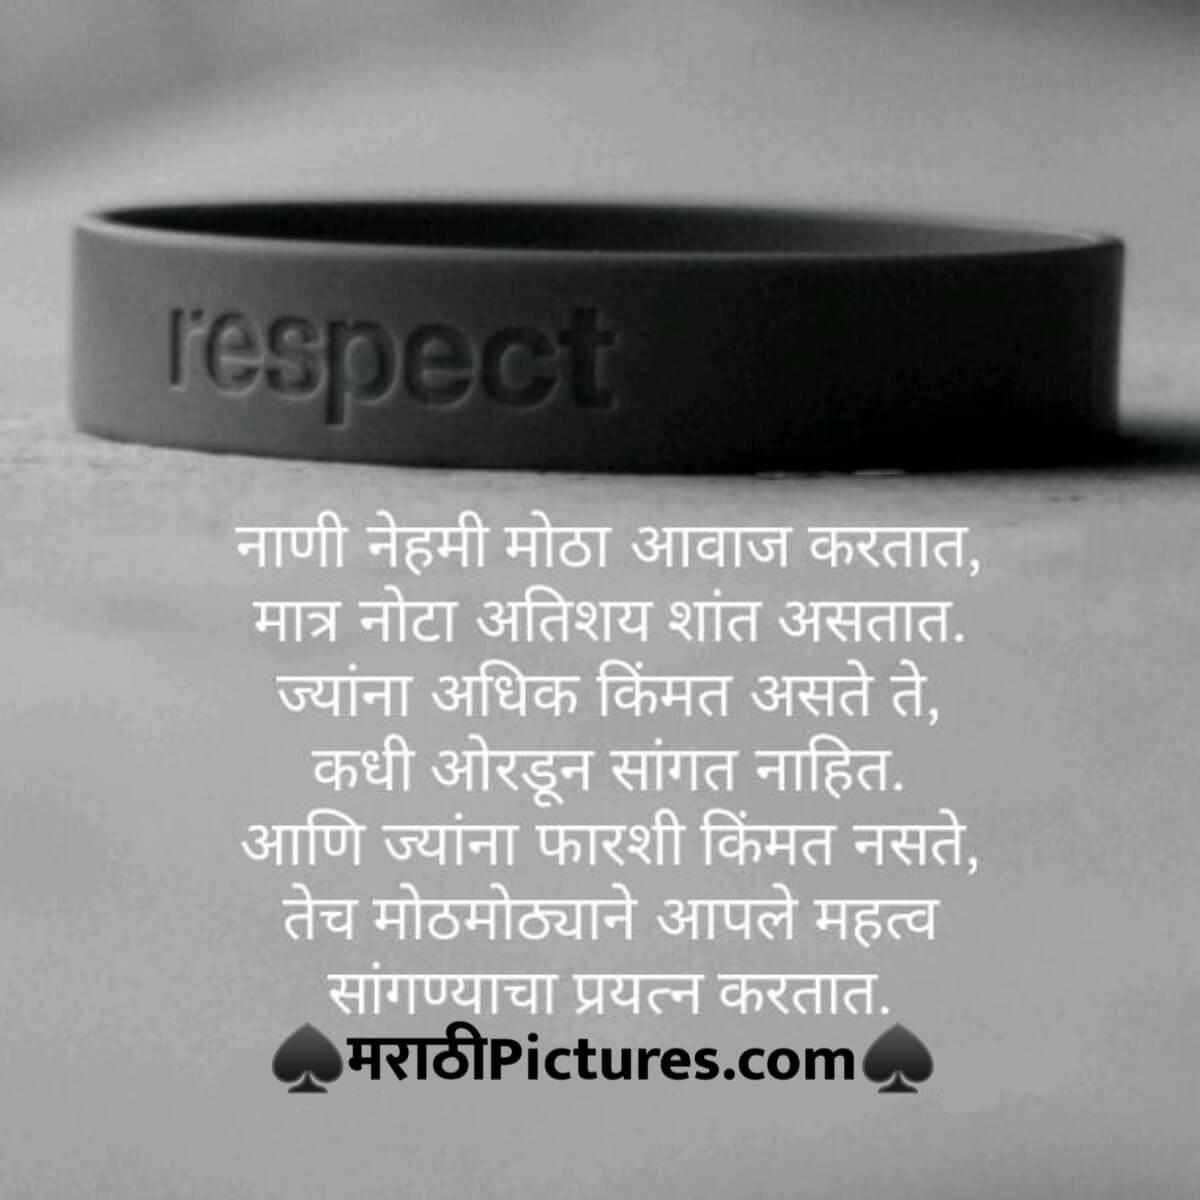 Pics for facebook and whatsapp in marathi fonts